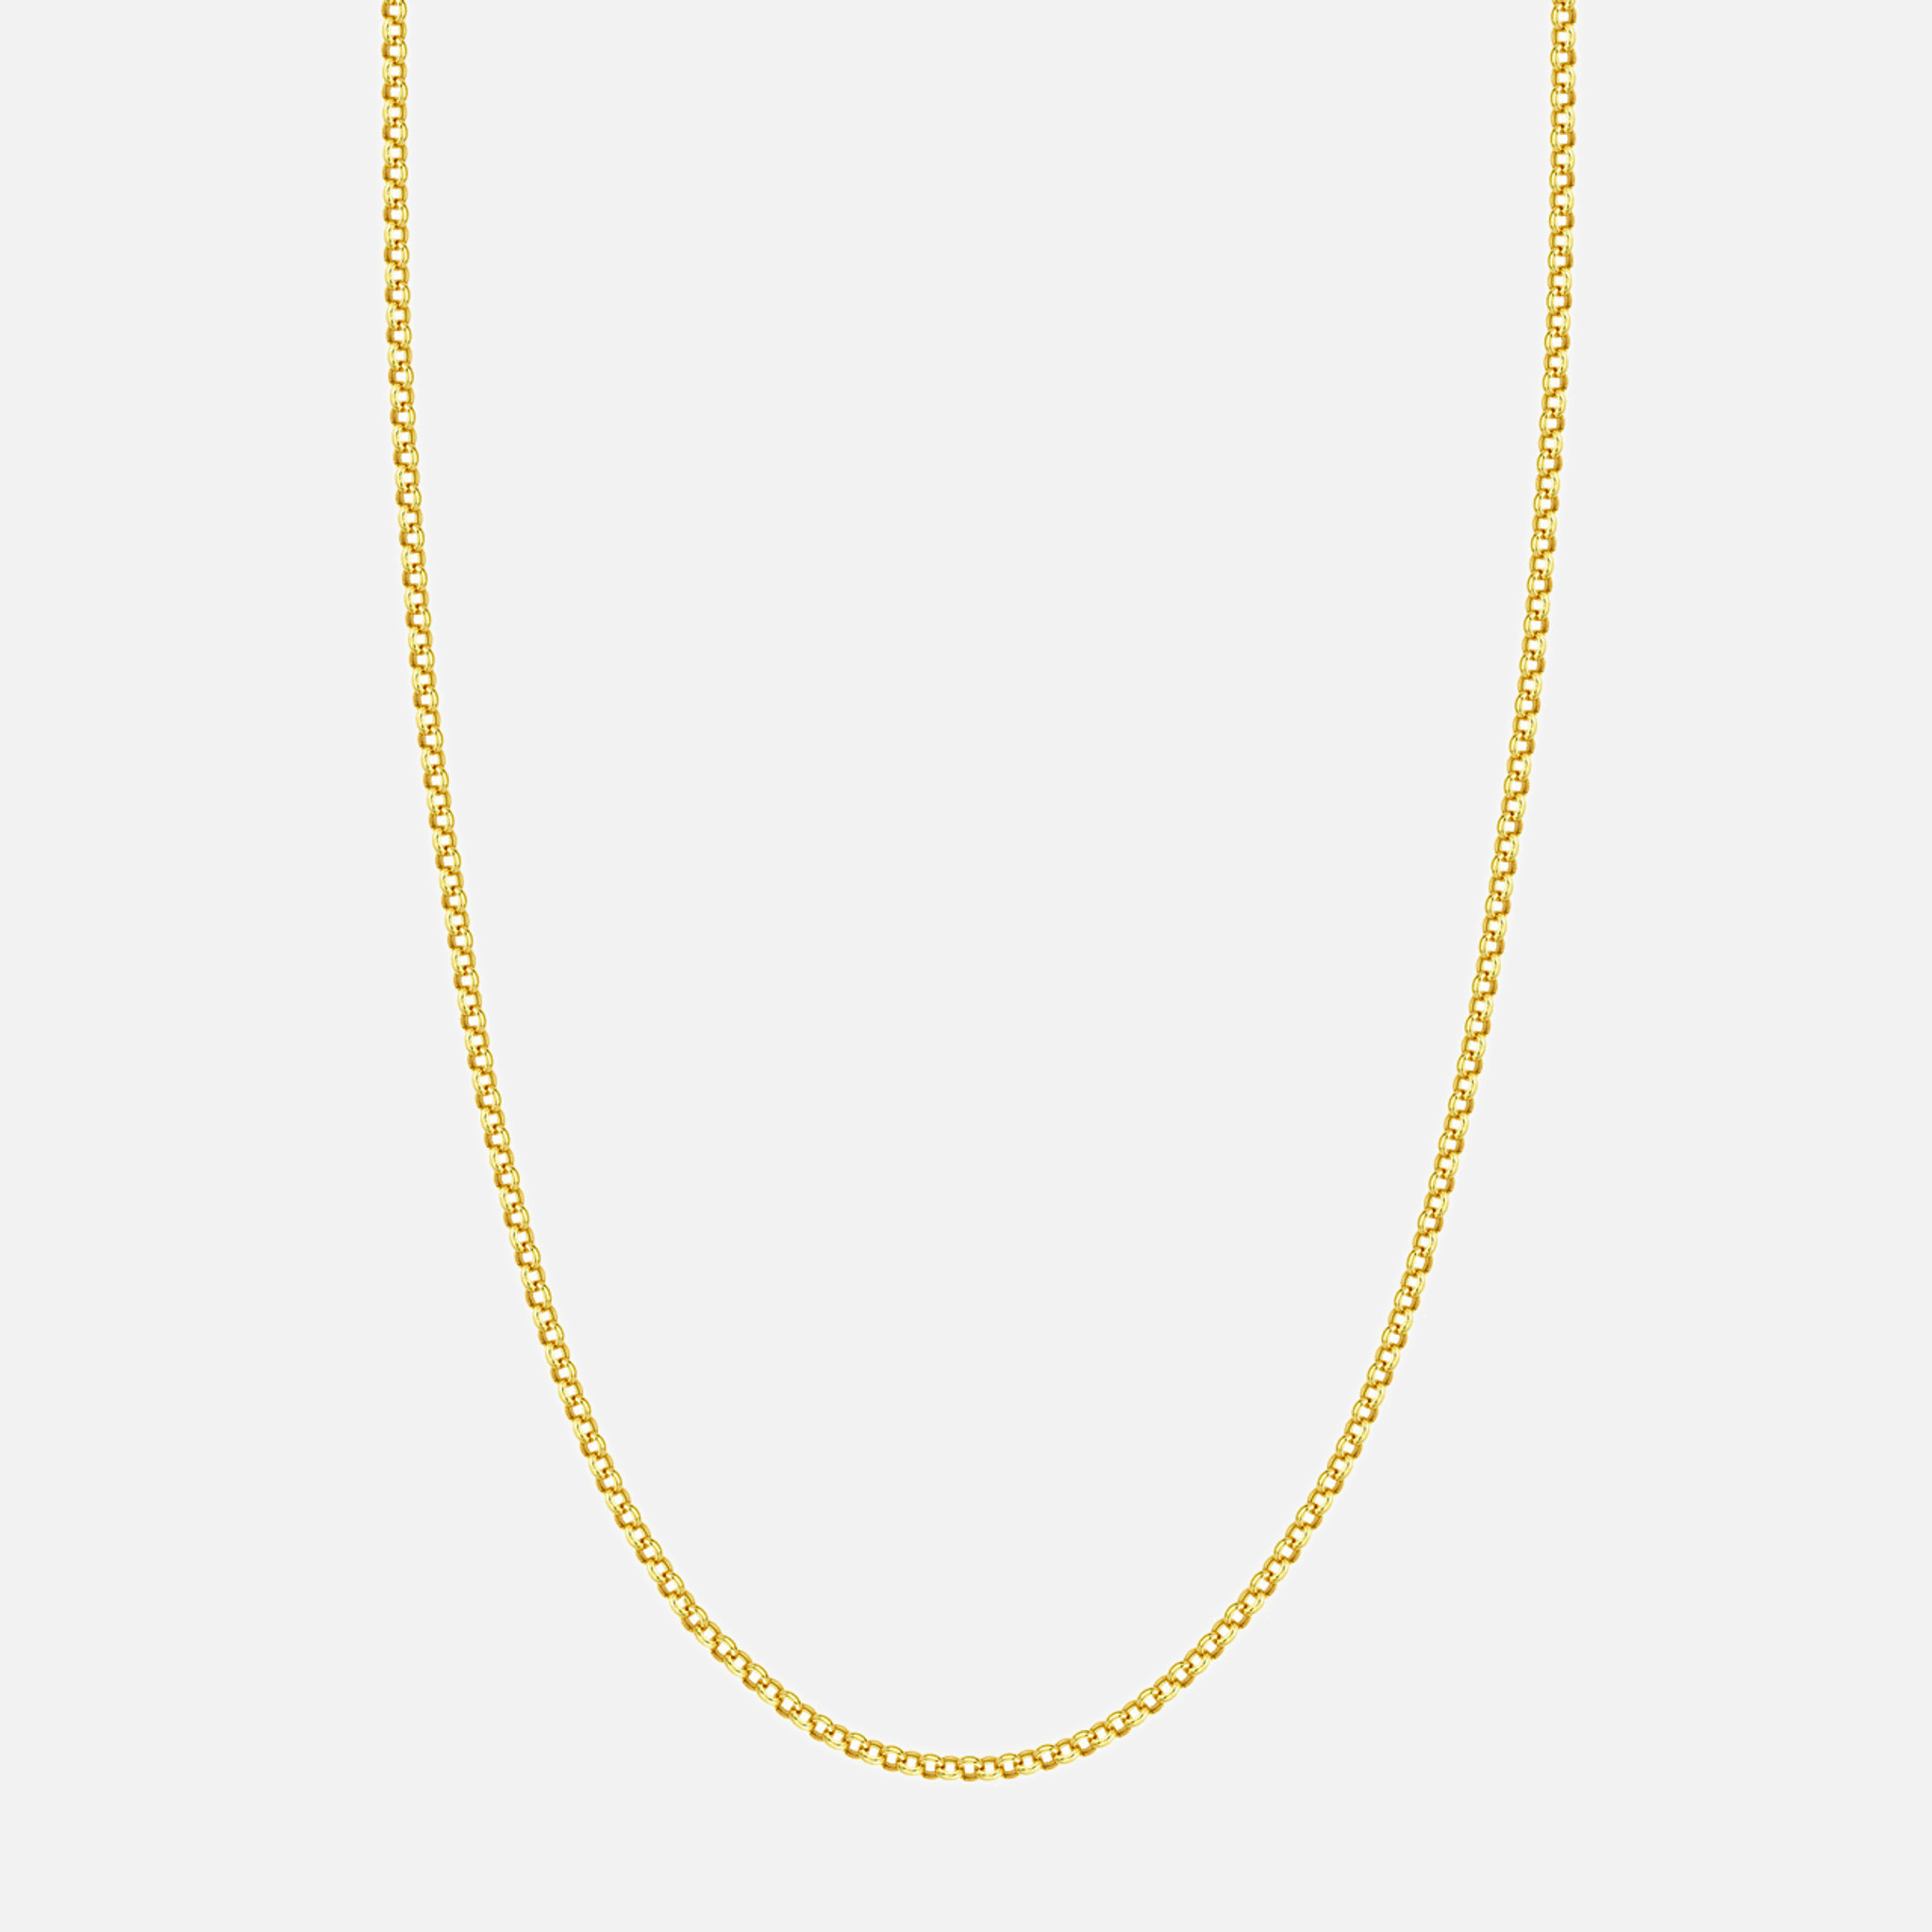 A Lite rolo chain necklace in buttery 10k and 14k gold, showcasing rounded belcher links.